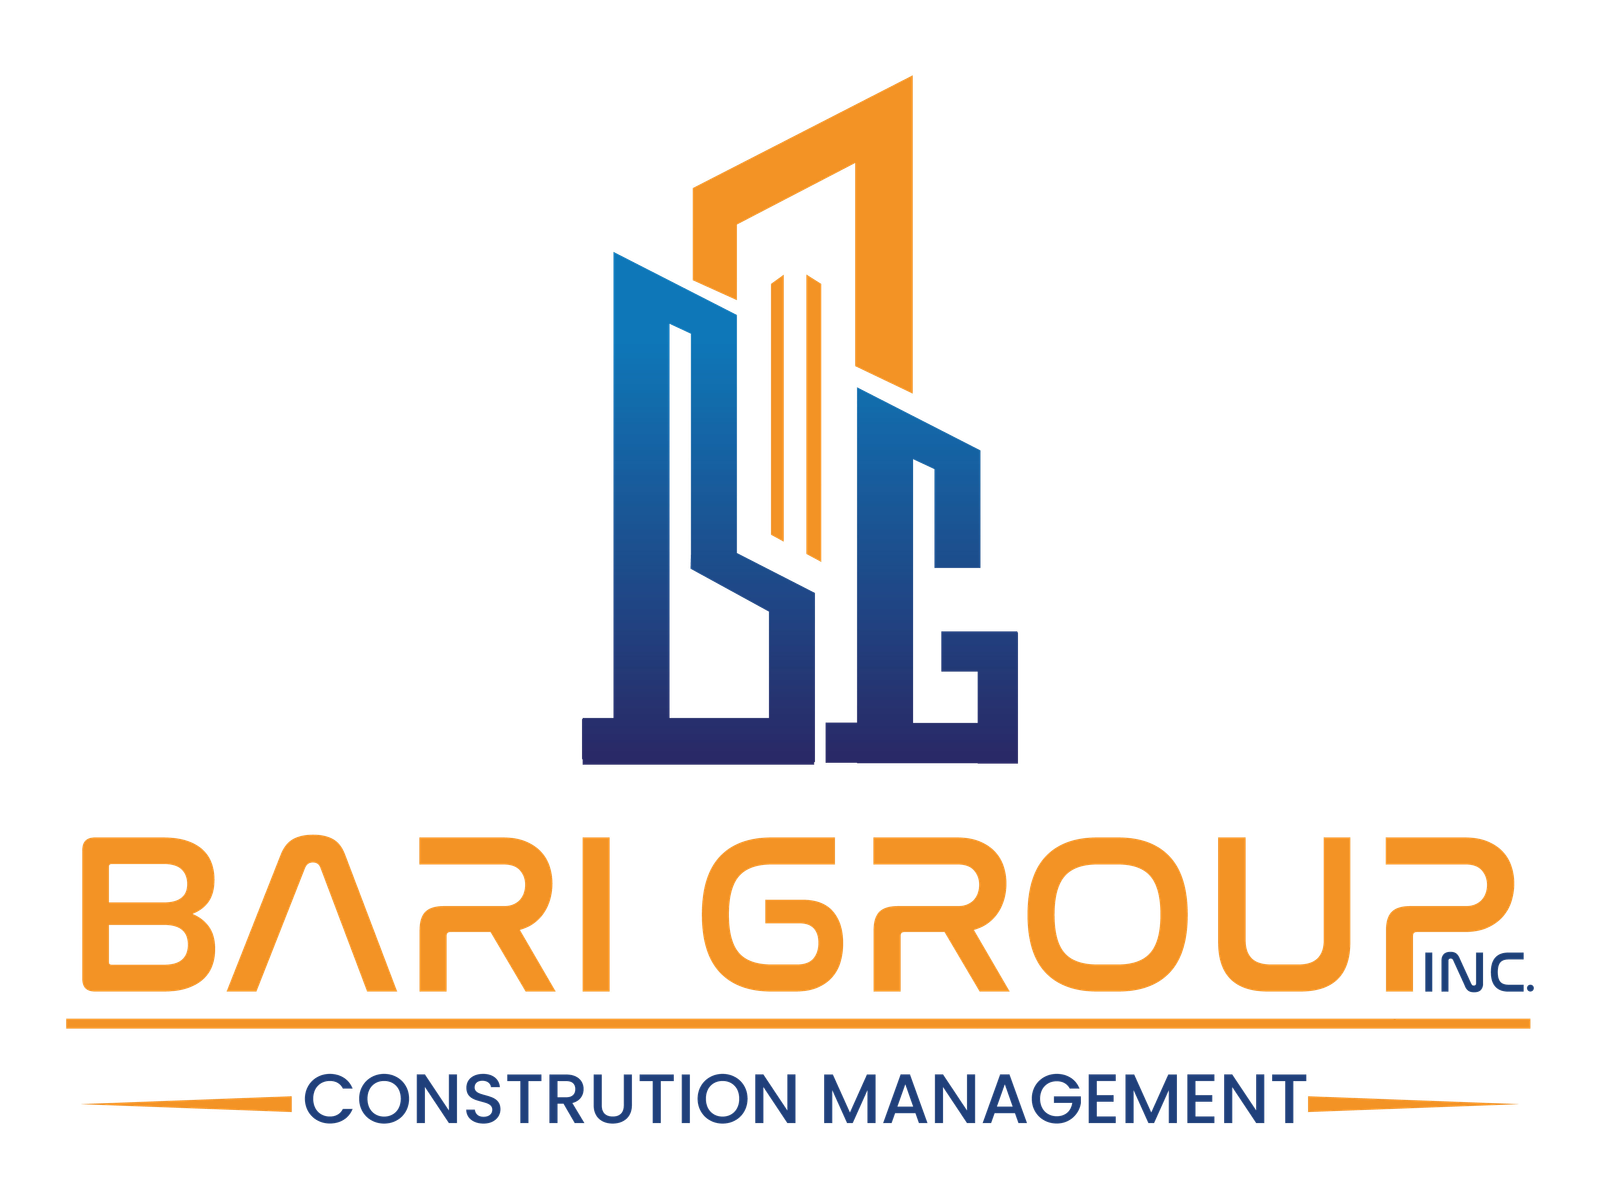 Welcome to Bari Group Inc. A Leading Construction Development Company